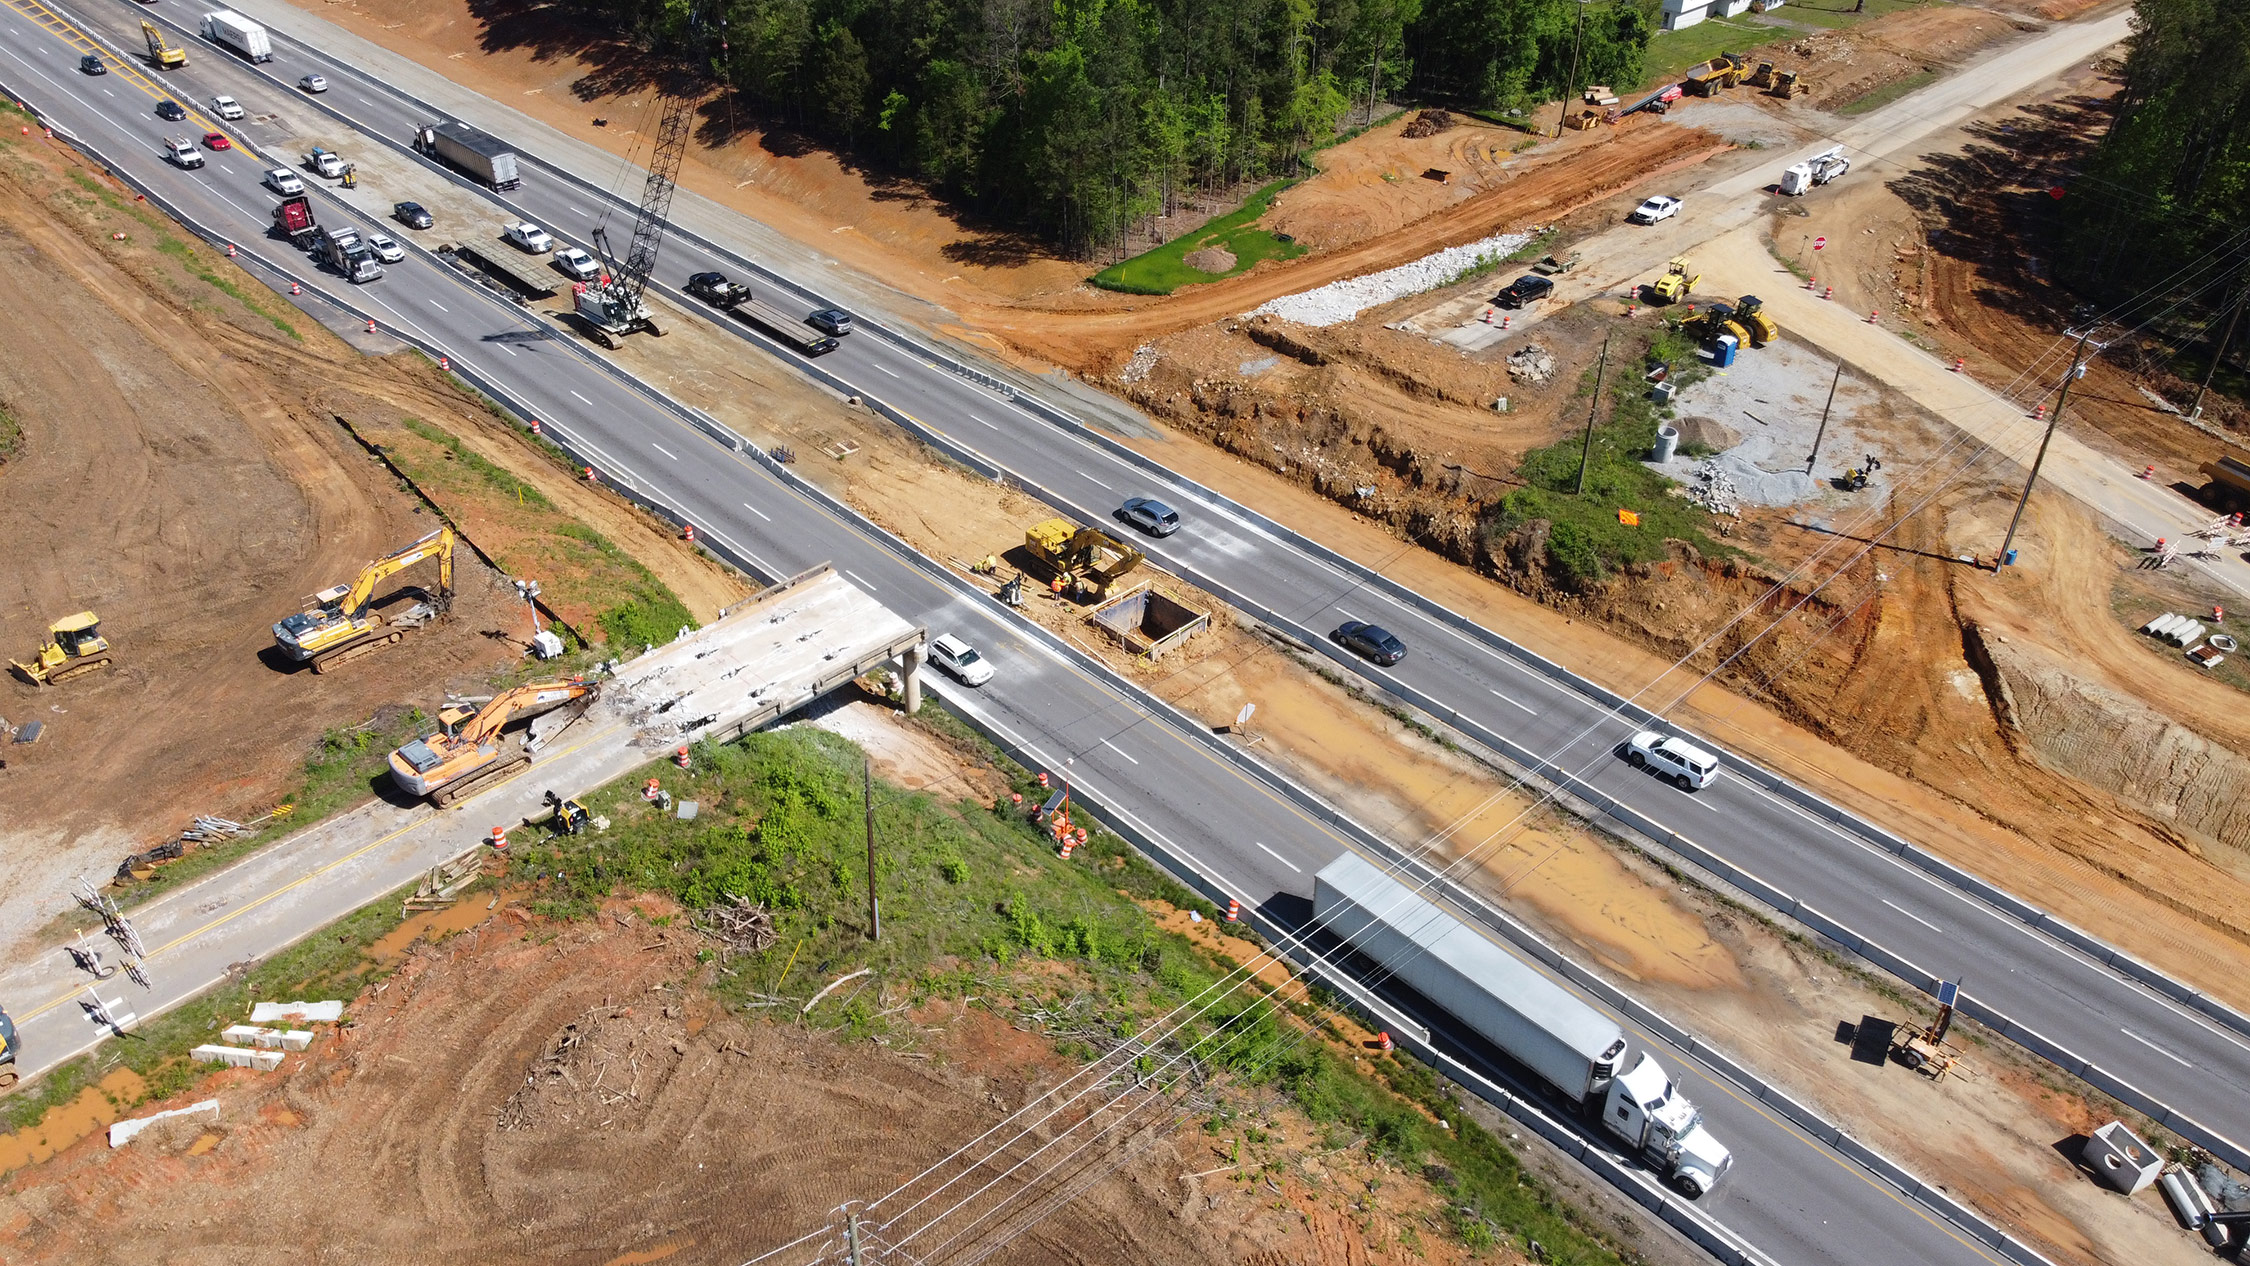 The Koon Road overpass has been demolished, utility relocations are complete, and the new bridge is under construction.  The new bridge is scheduled to be open in December 2022.